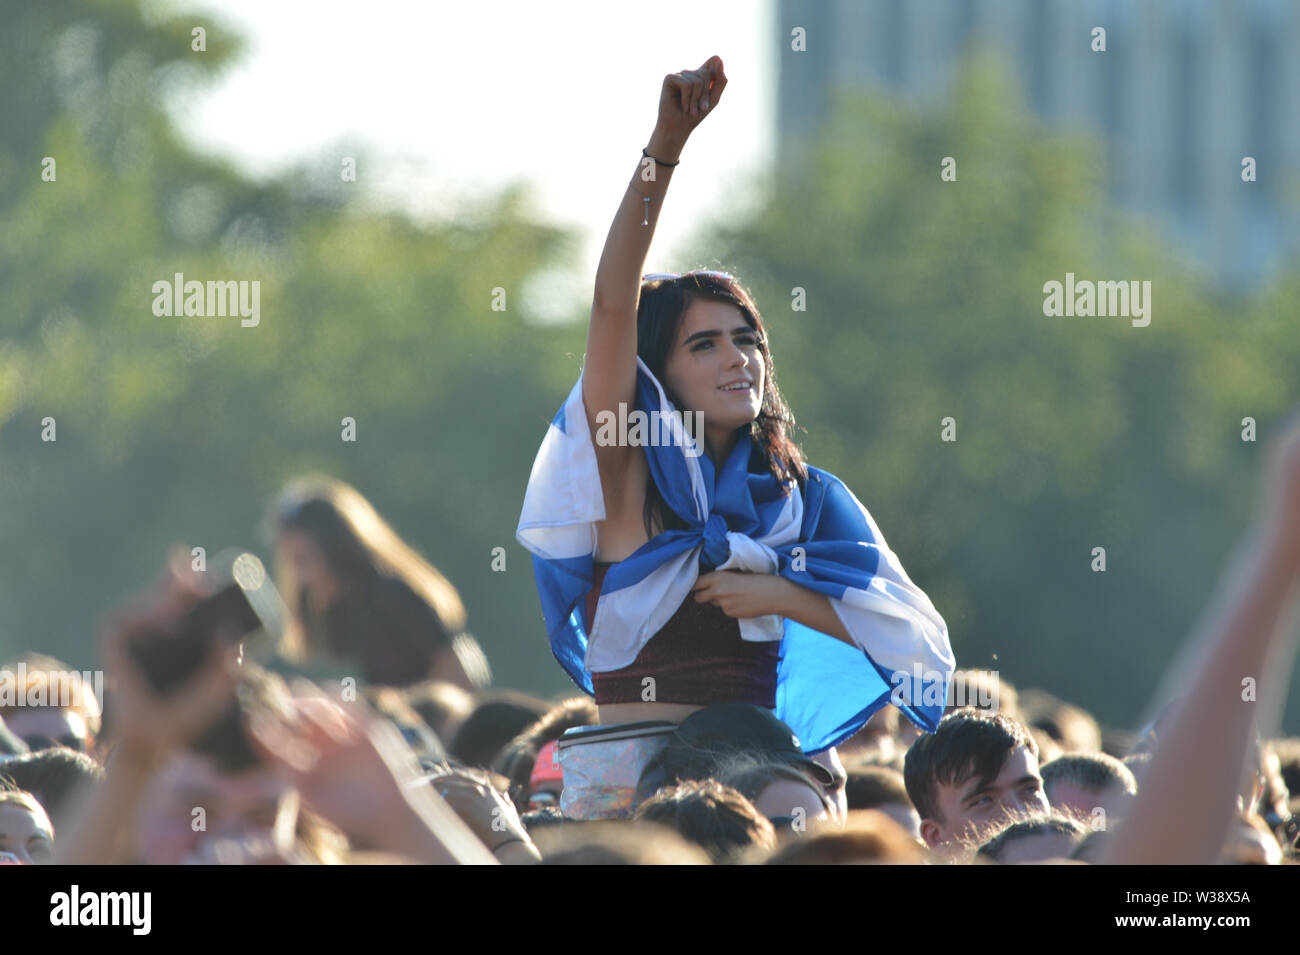 Glasgow, UK. 13 July 2019. Bastille live in Concert at TRNSMT Music Festival on the main stage. Dan Smith, lead vocalist takes the Main Stage. Credit: Colin Fisher/Alamy Live News Stock Photo